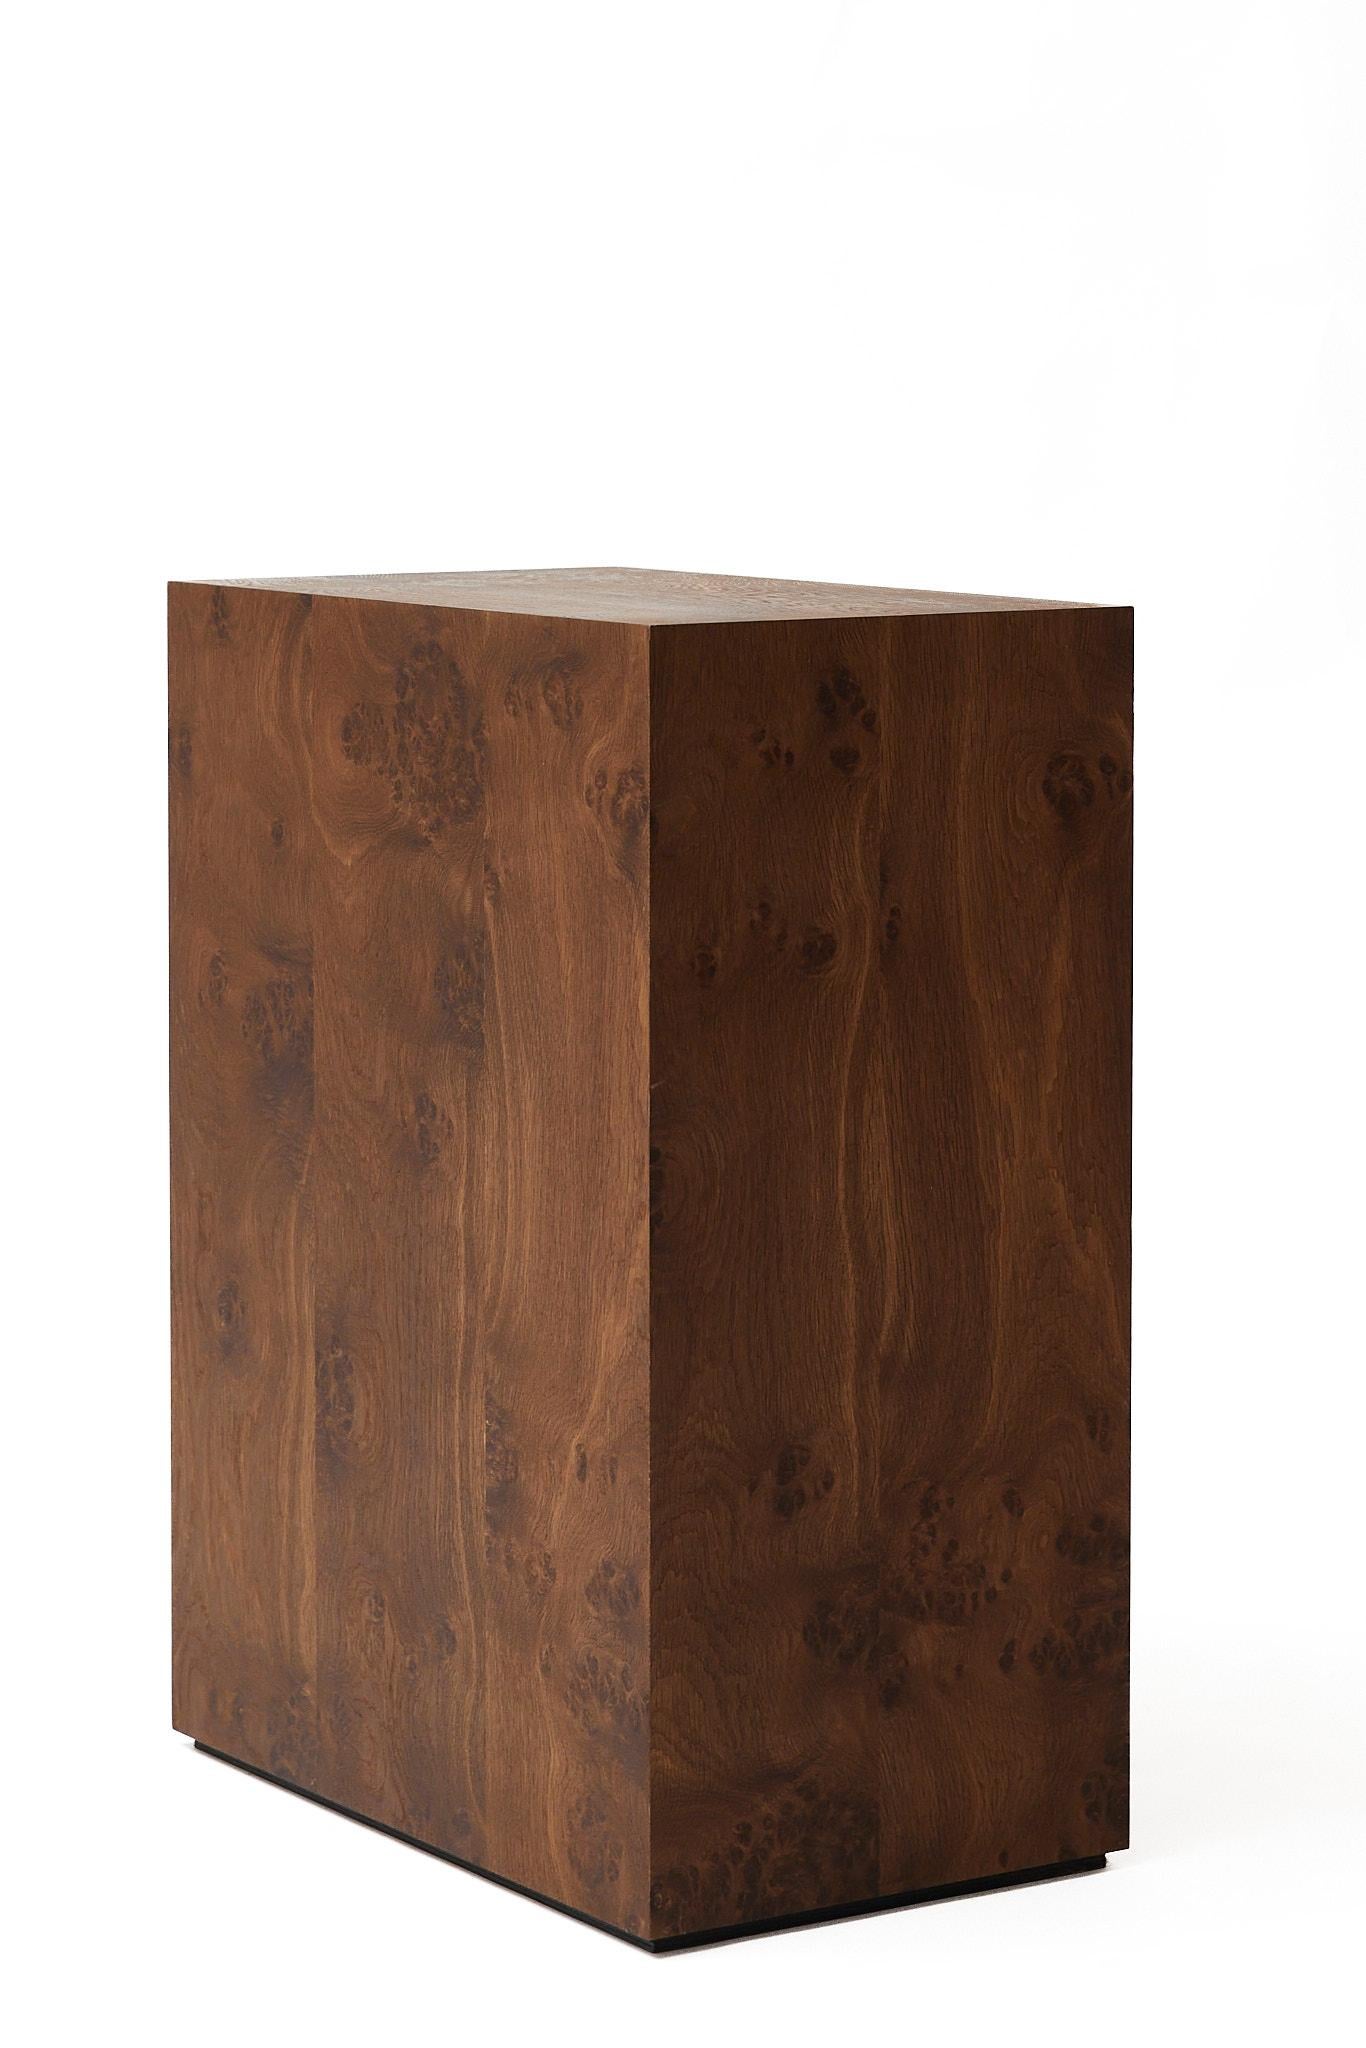 Danish Square wooden pedestal stand in smoked oak For Sale